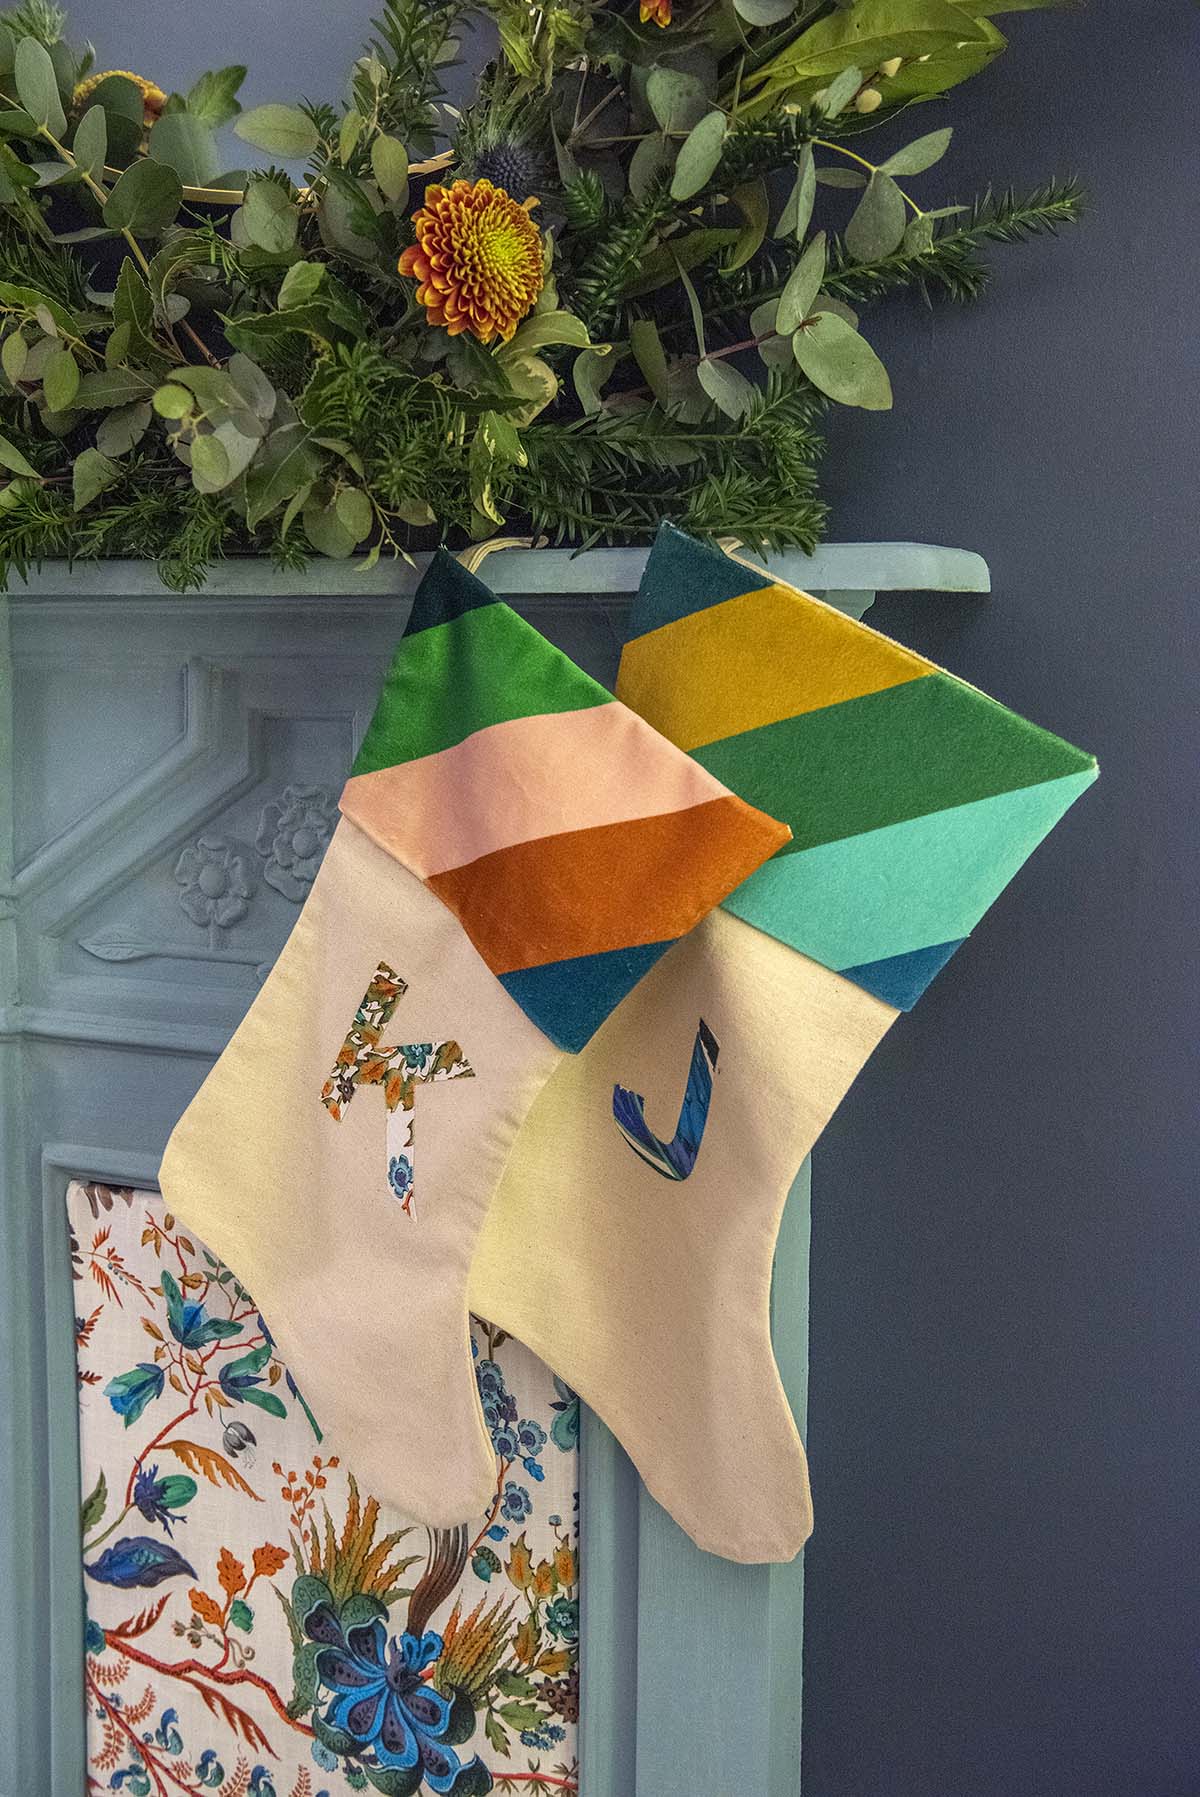 Two stockings hang on a mantlepiece, embroidered with the letters K and J